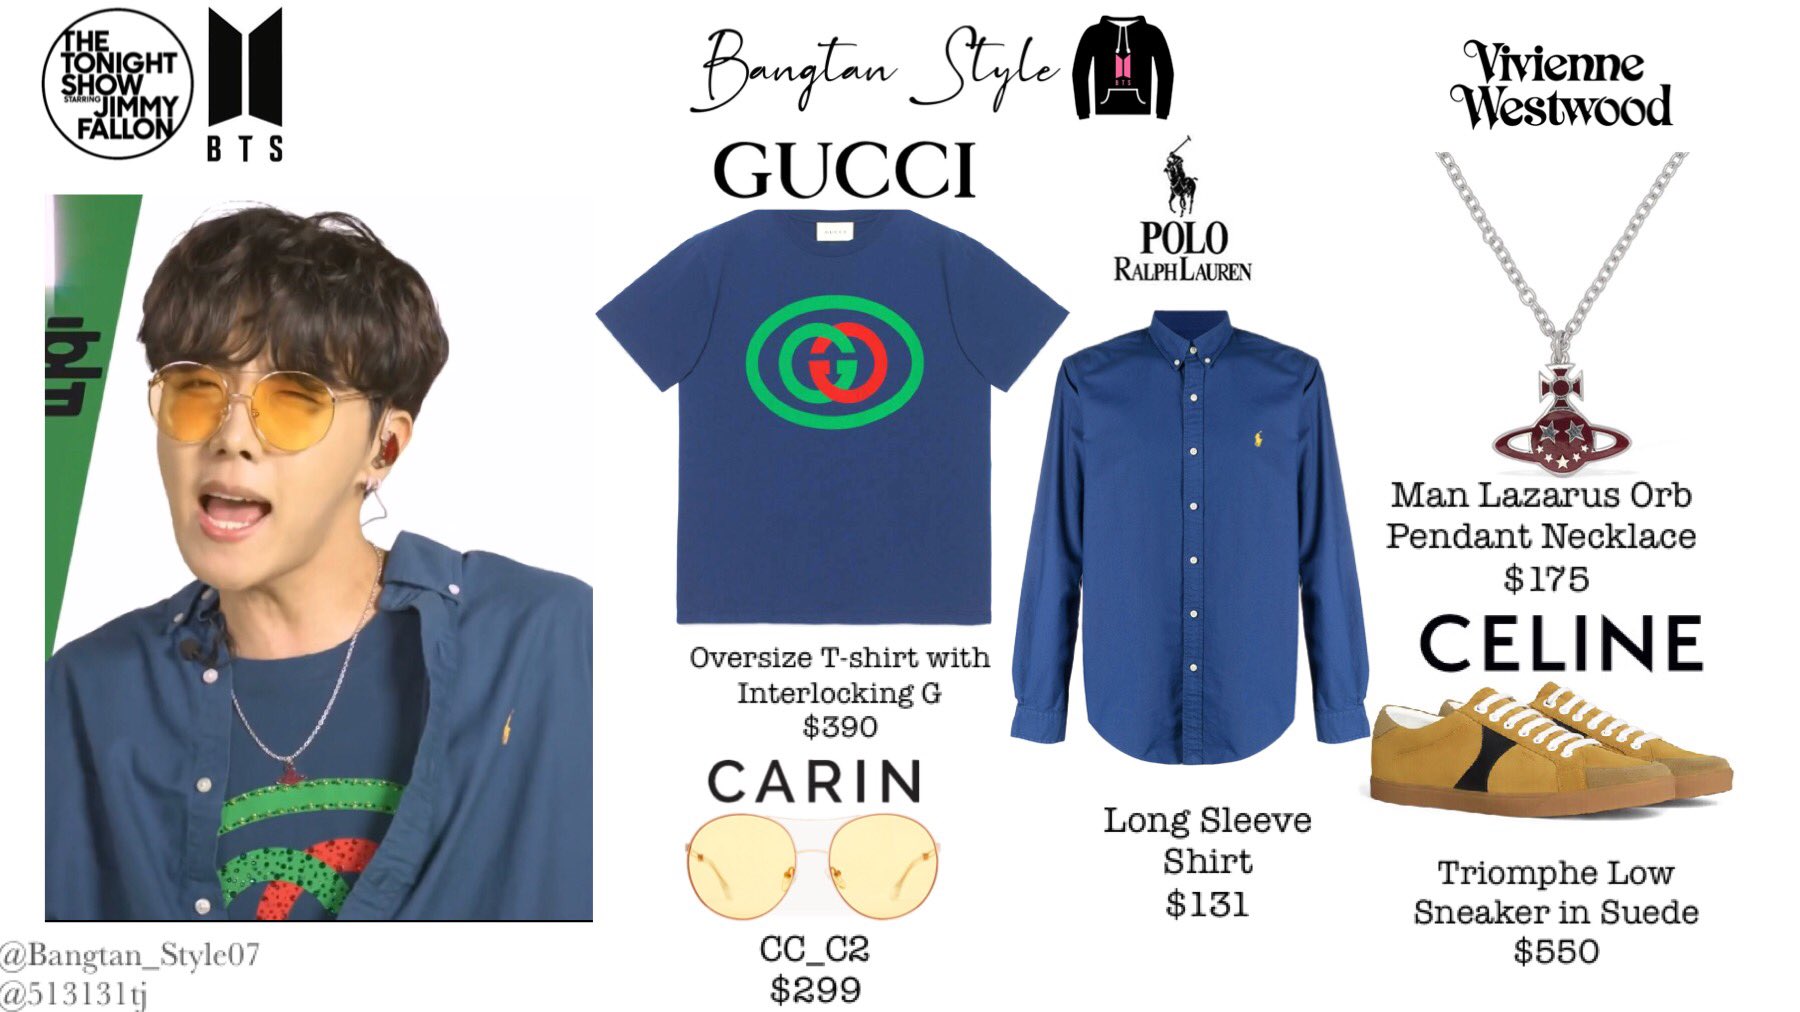 Bangtan Style⁷ (slow) on X: Twitter Post 210708 Hobi wears Louis Vuitton  Wrap Coat ($4600) & LV Dust Sunglasses ($735). He also holds a Coffee Cup  Monogram Bag ($1775) & Newspaper Pouch ($